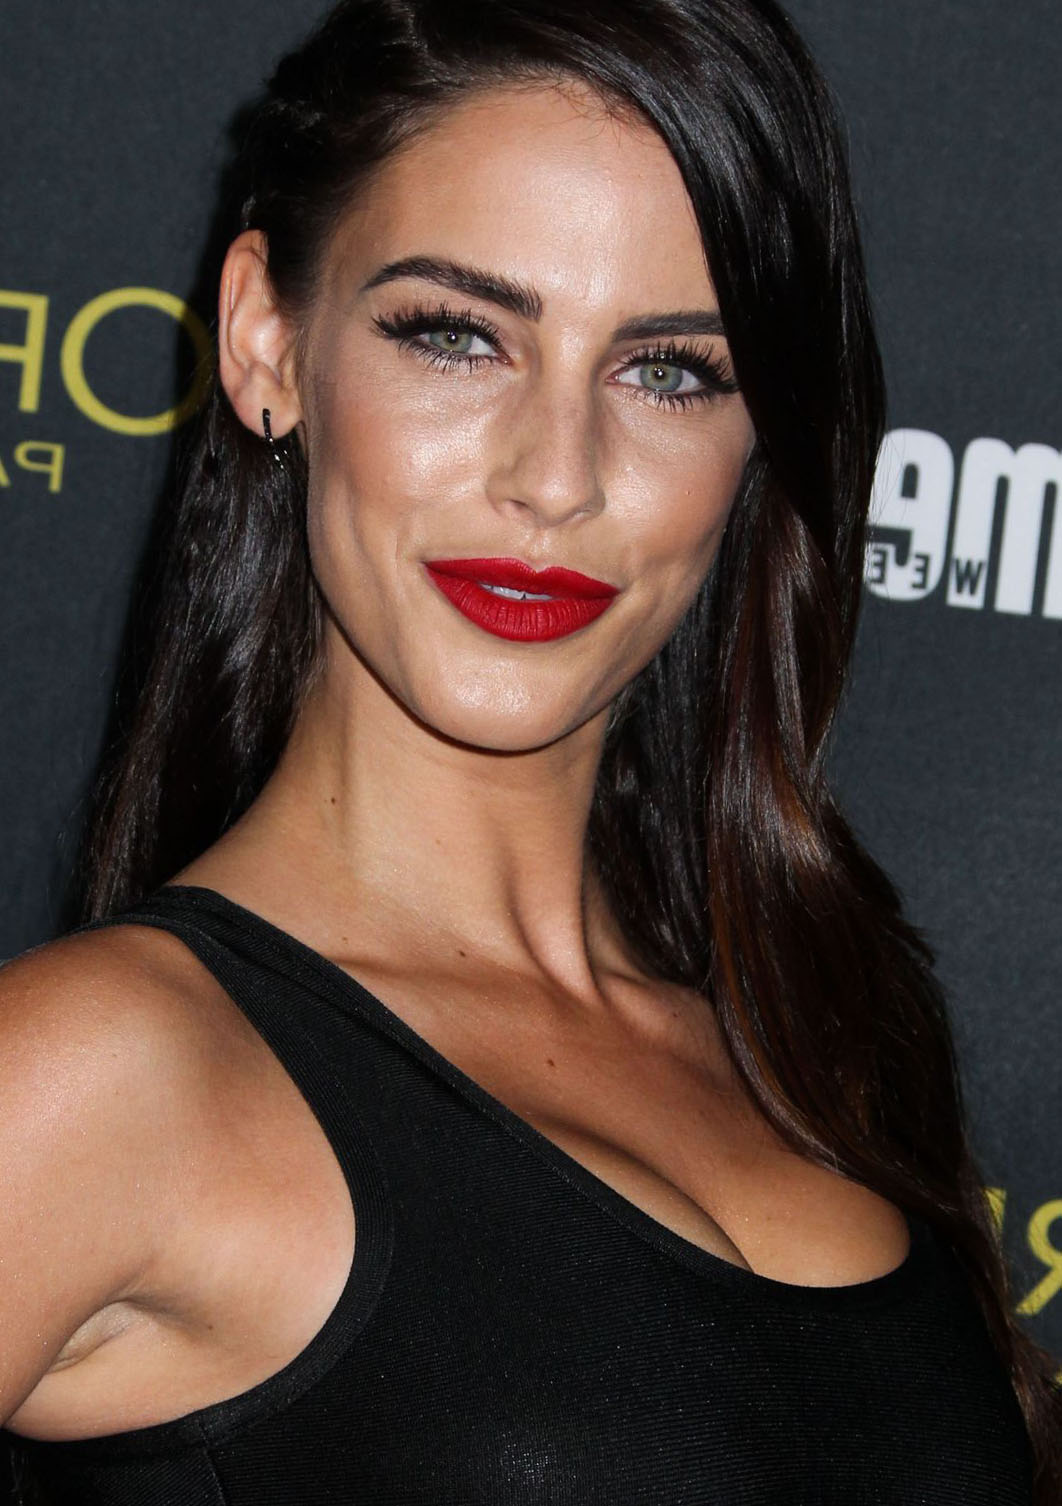 Jessica lowndes leaked